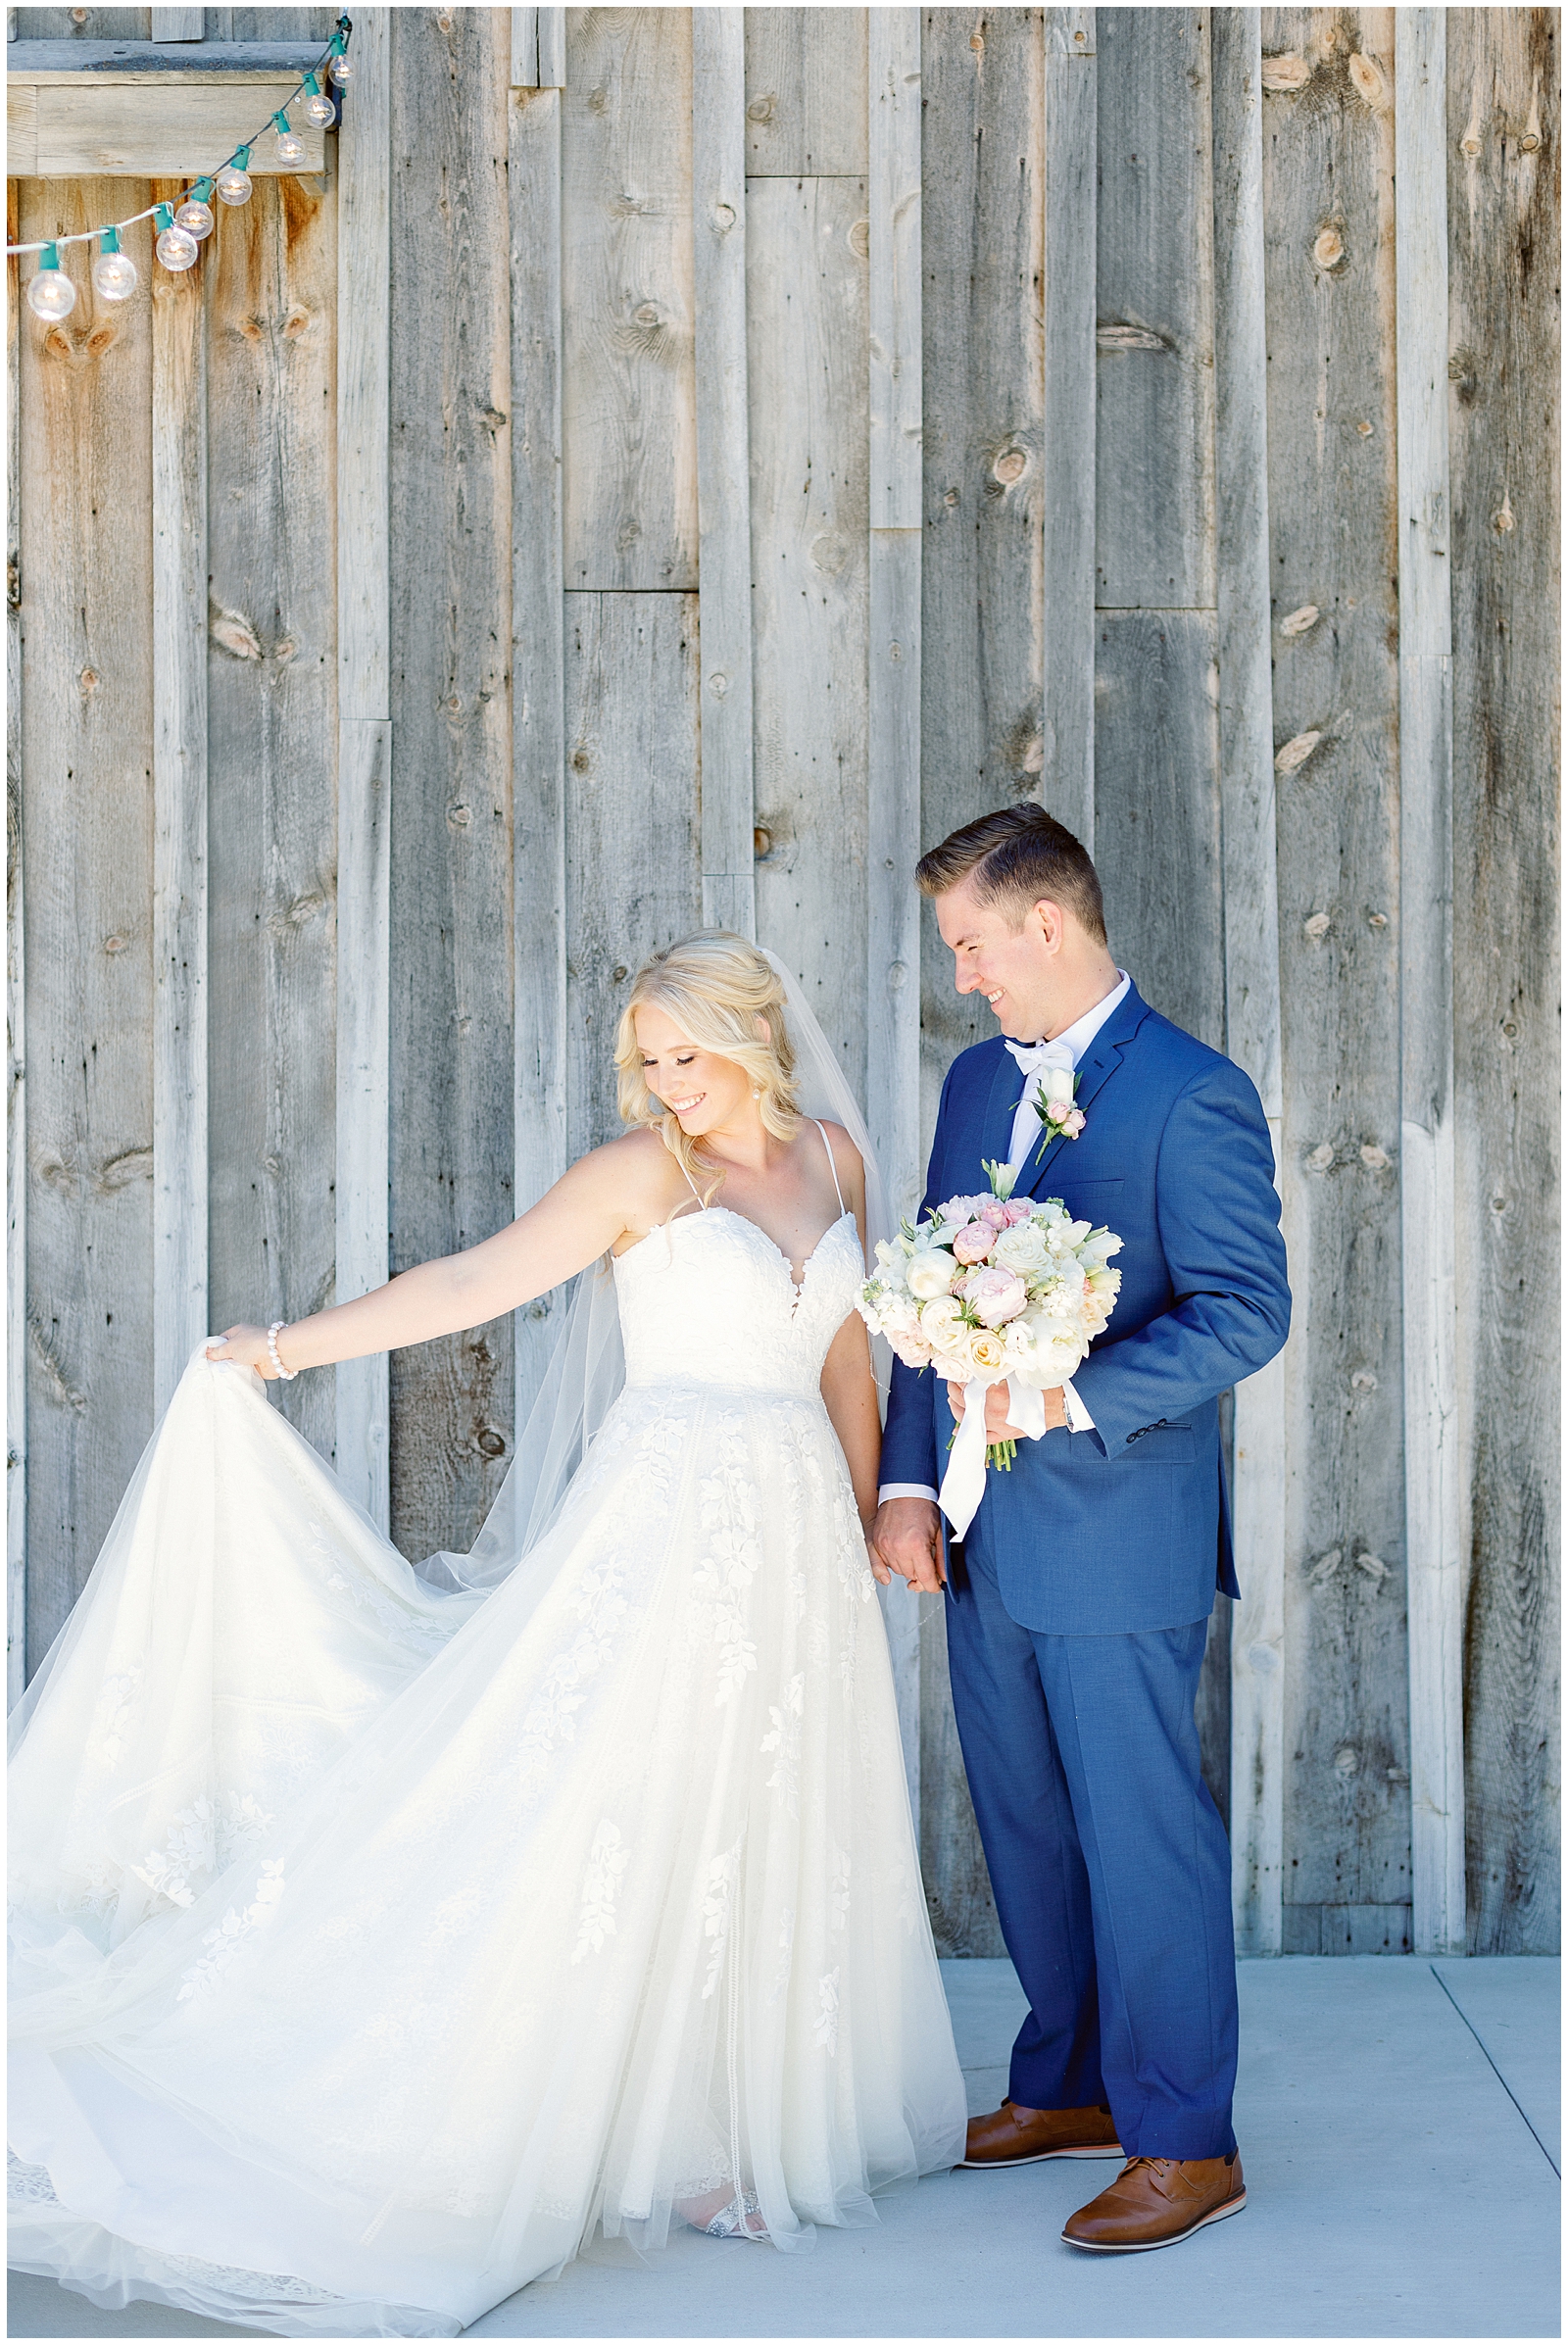 Portraits of the Bride and Groom at Romantic Still Water Hollow Wedding